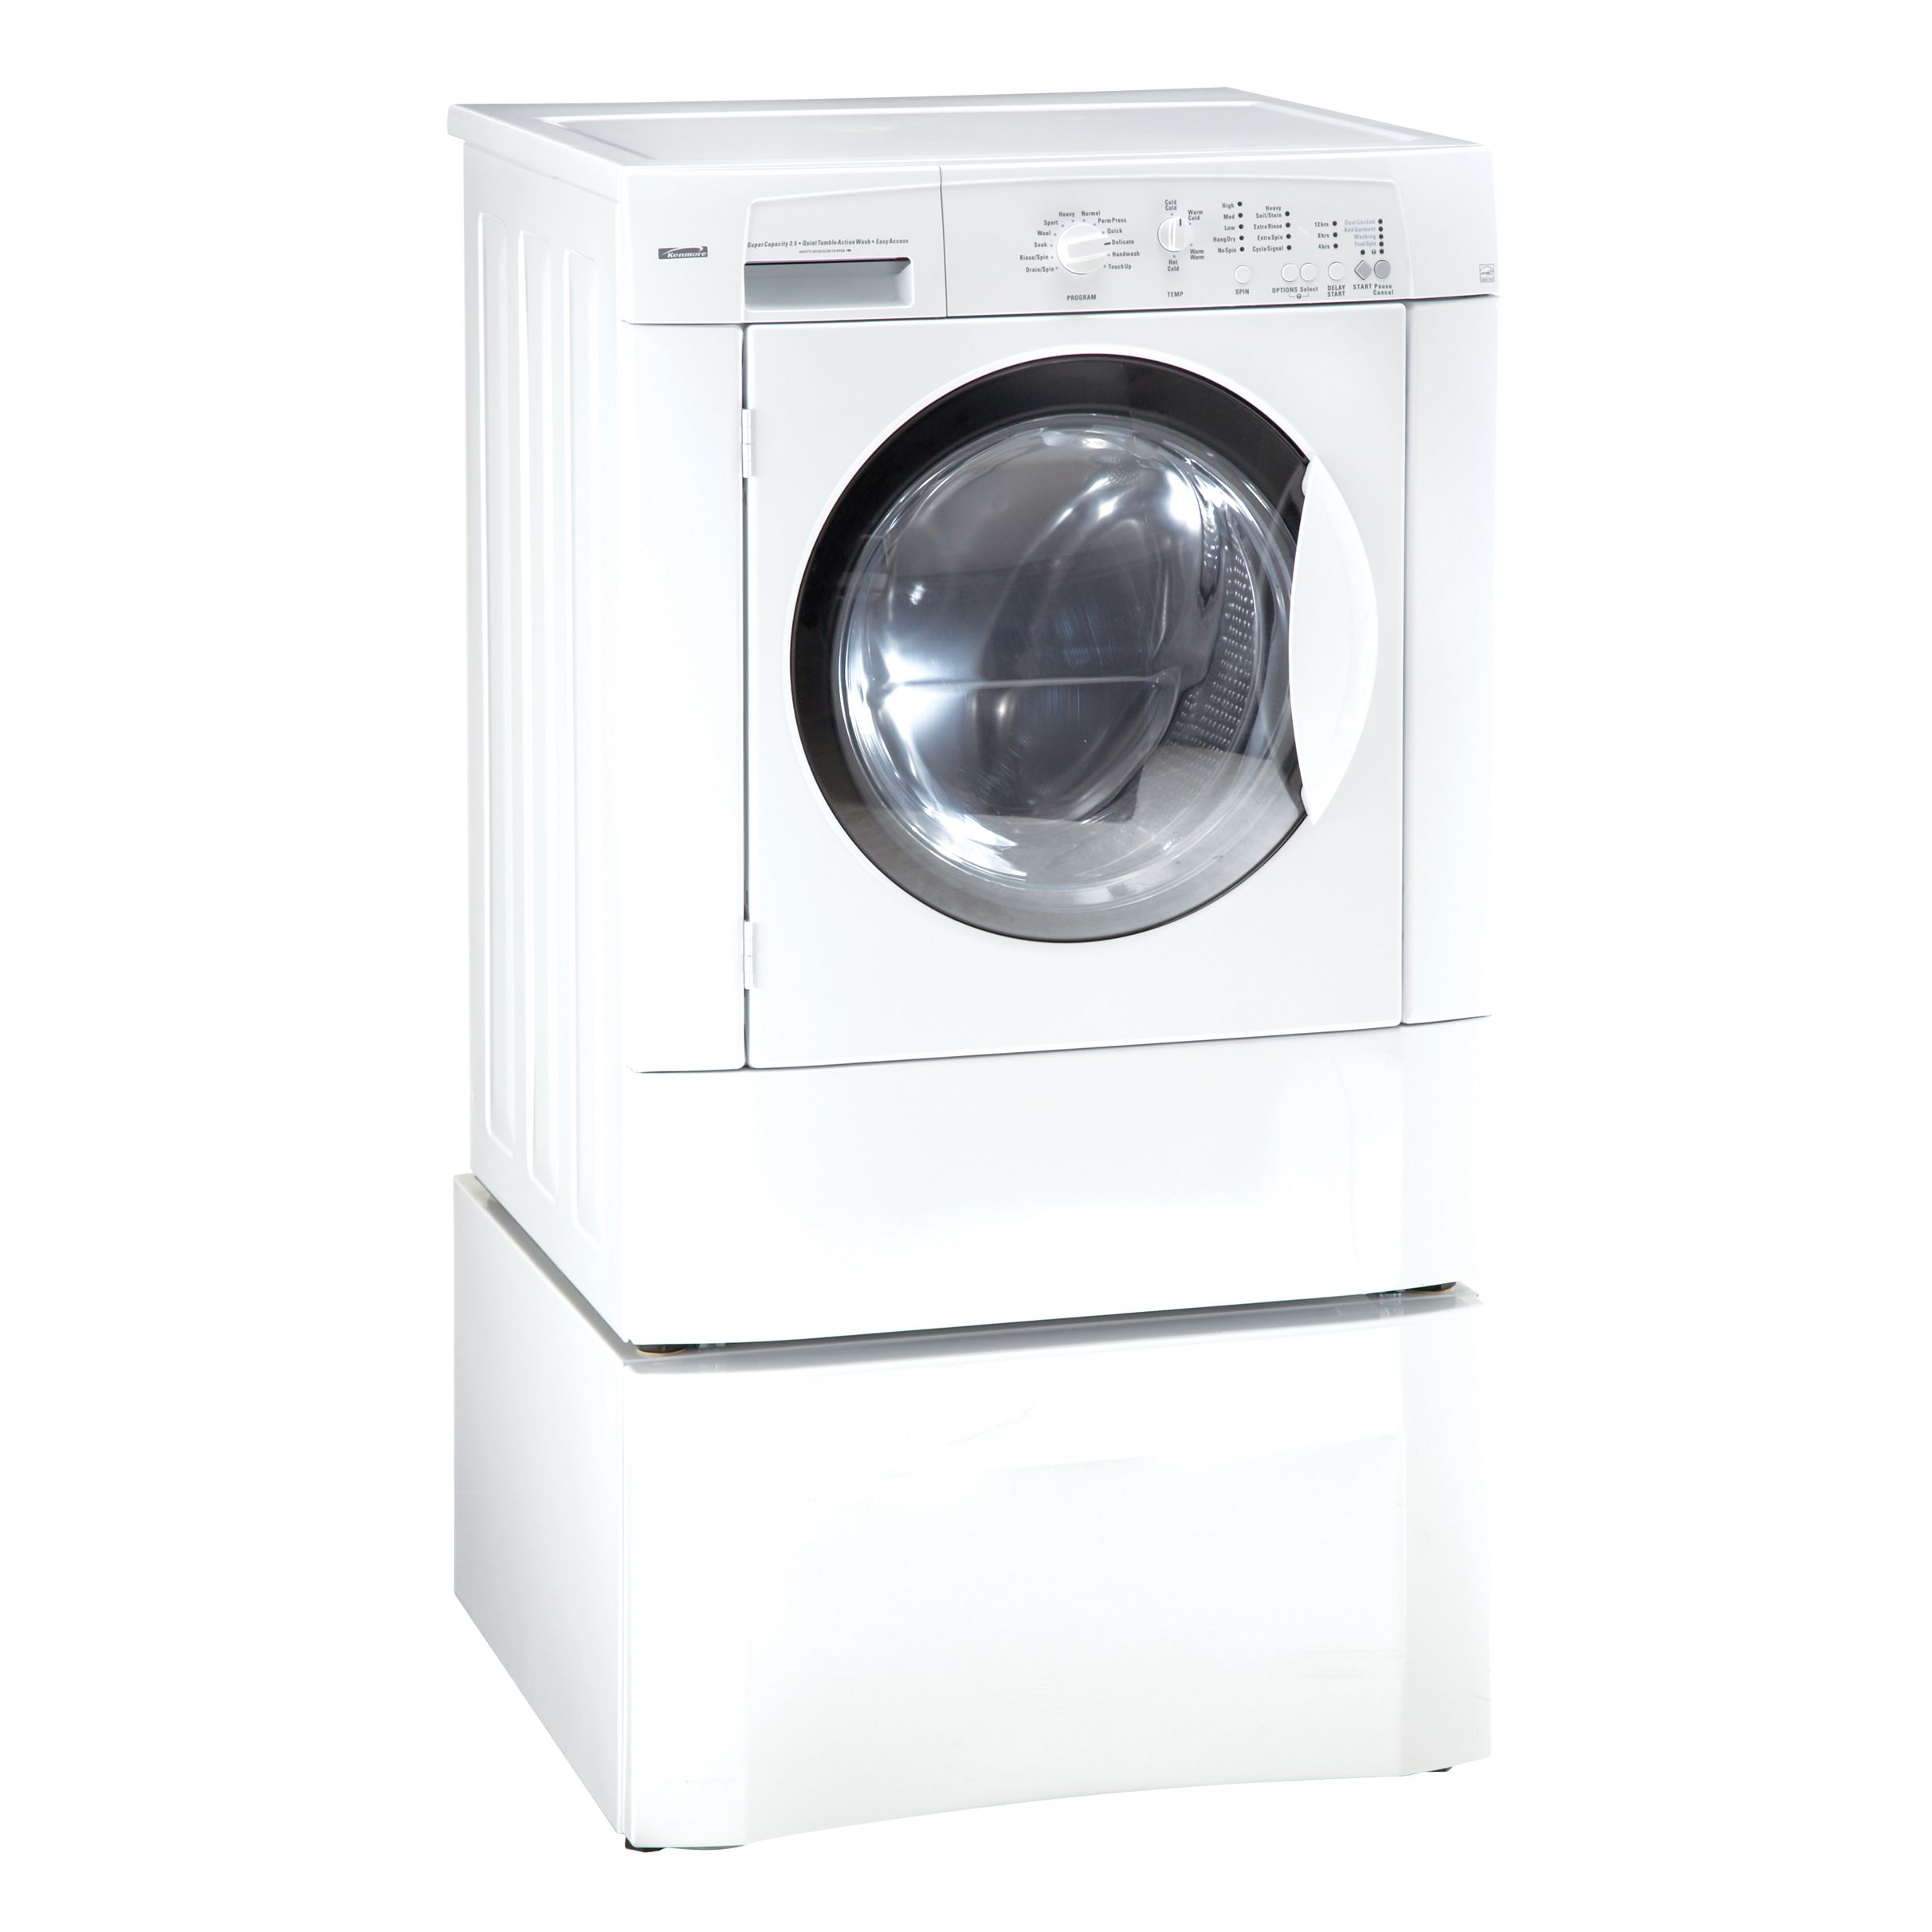 Kenmore 3.5 cu. ft. I.E.C. Super Capacity High-Efficiency Washer ENERGY